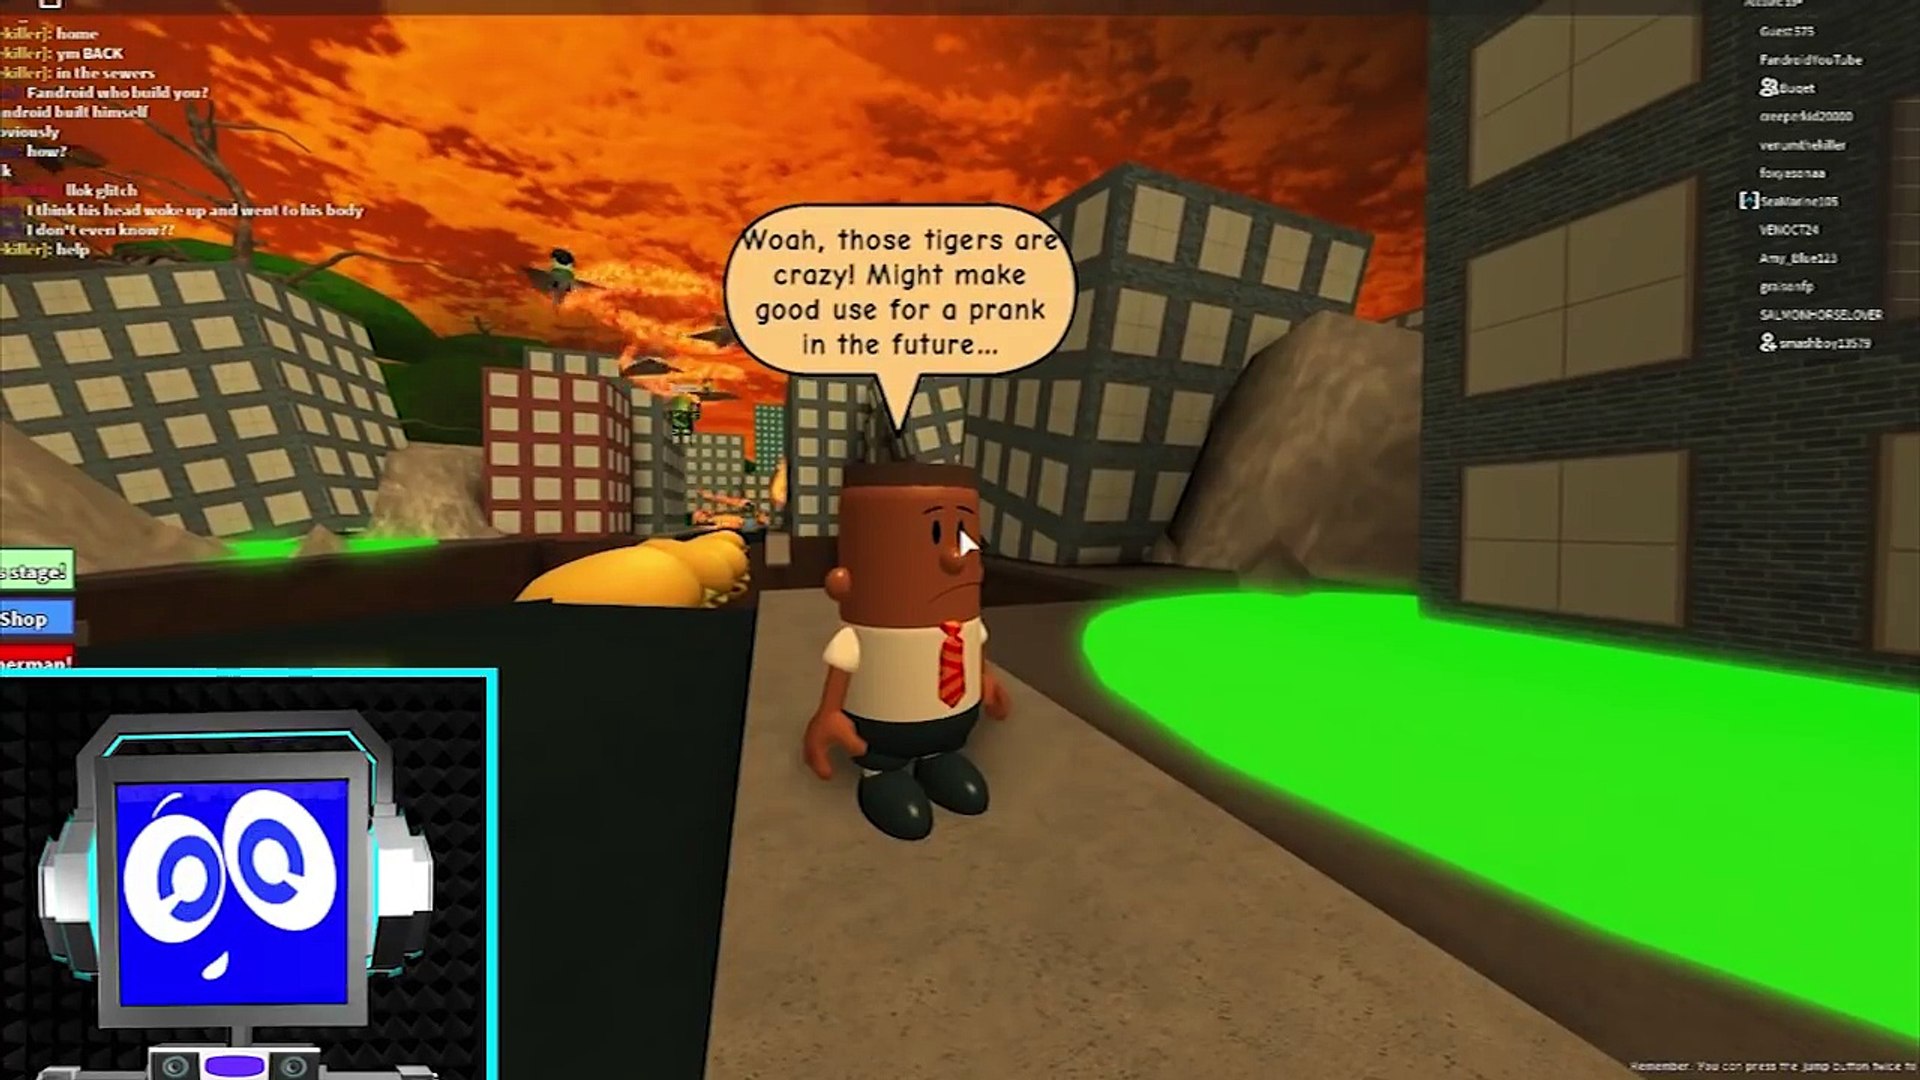 Captain Underpants Obby In Roblox Part 2 Superhero Fandroid Saves The Day - captain underpants obby in roblox part 2 superhero fandroid